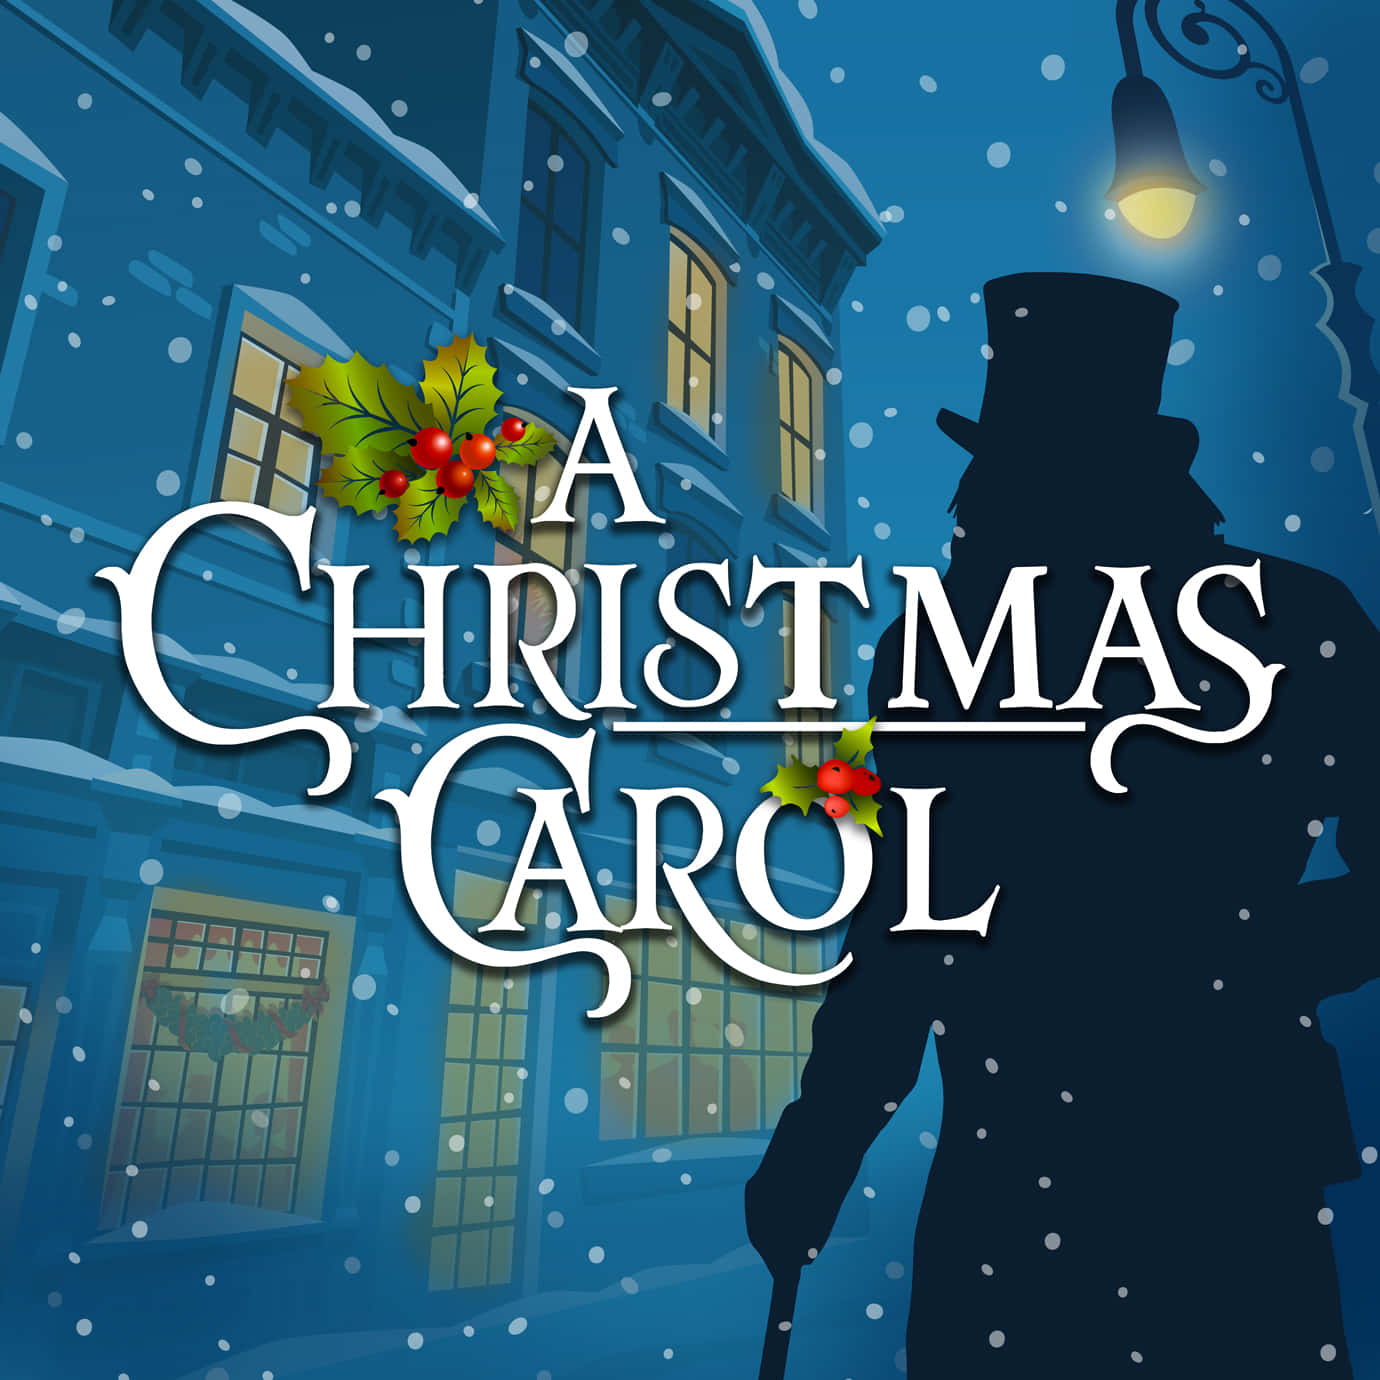 Download Vibrant Scenery Of A Christmas Carol | Wallpapers.com